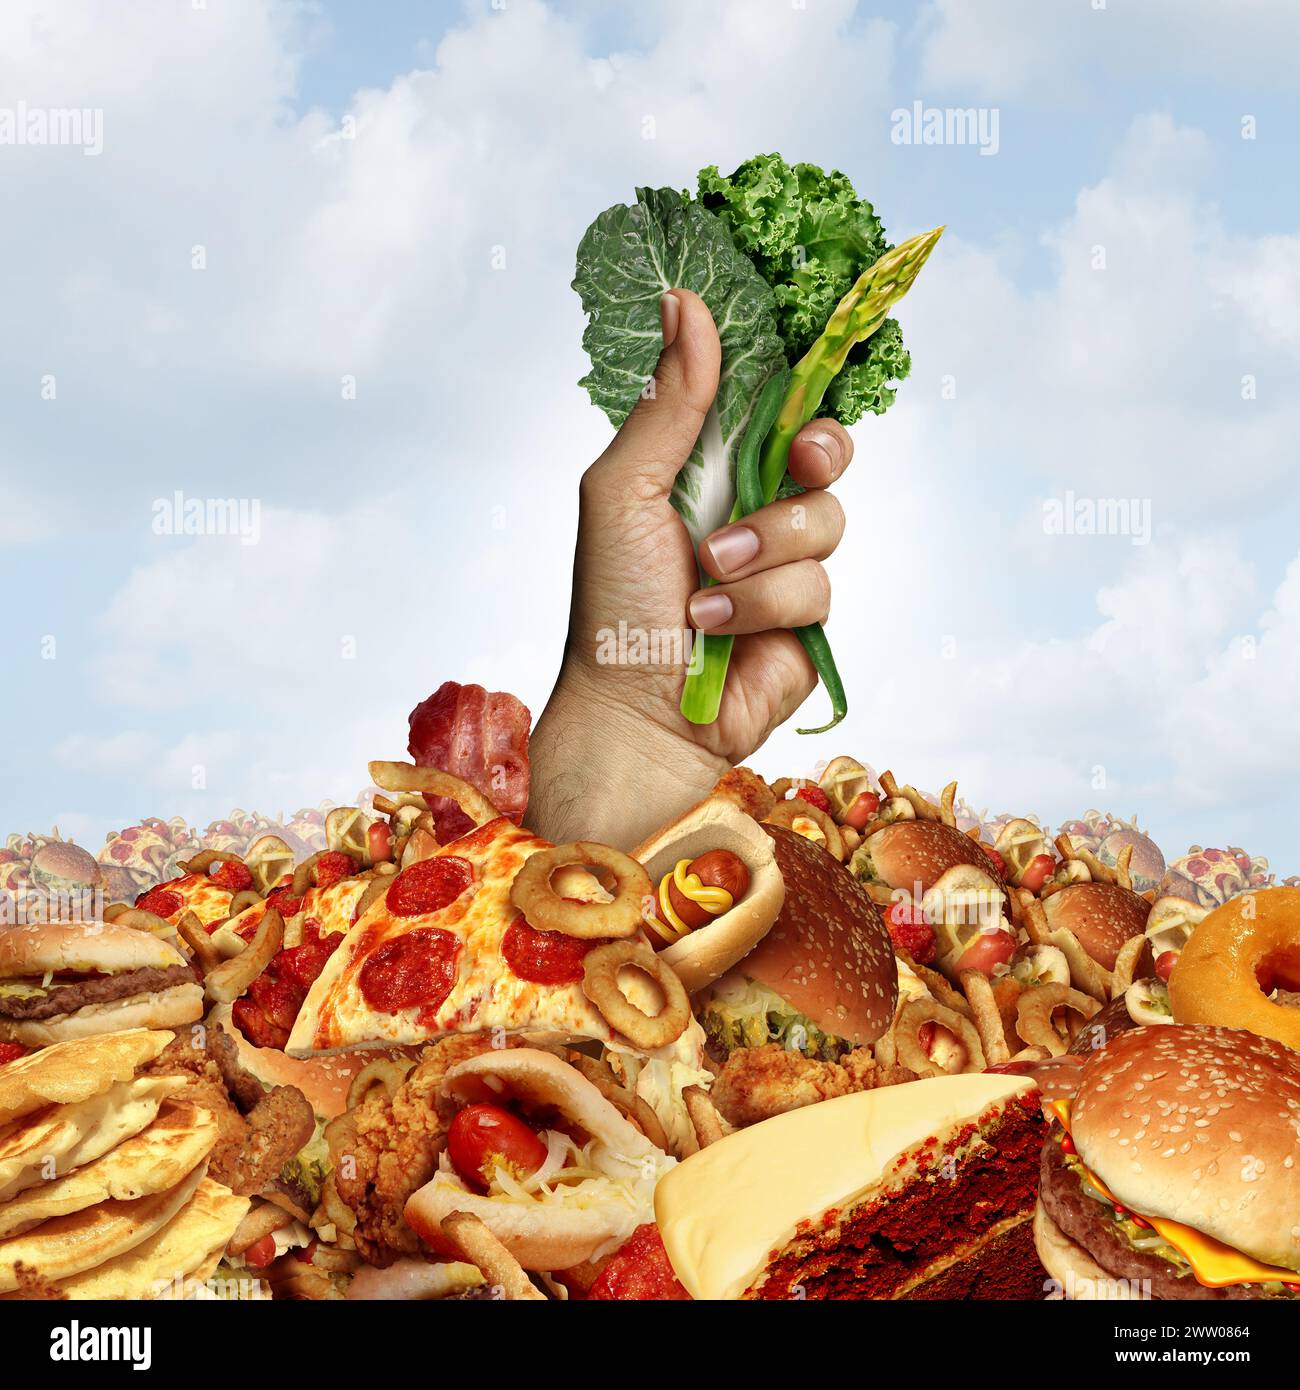 Struggle To Eat Healthy natural Food and the difficulty in living a nutritious life when surrounded by tempting greasy high fat and cholesterol rich s Stock Photo